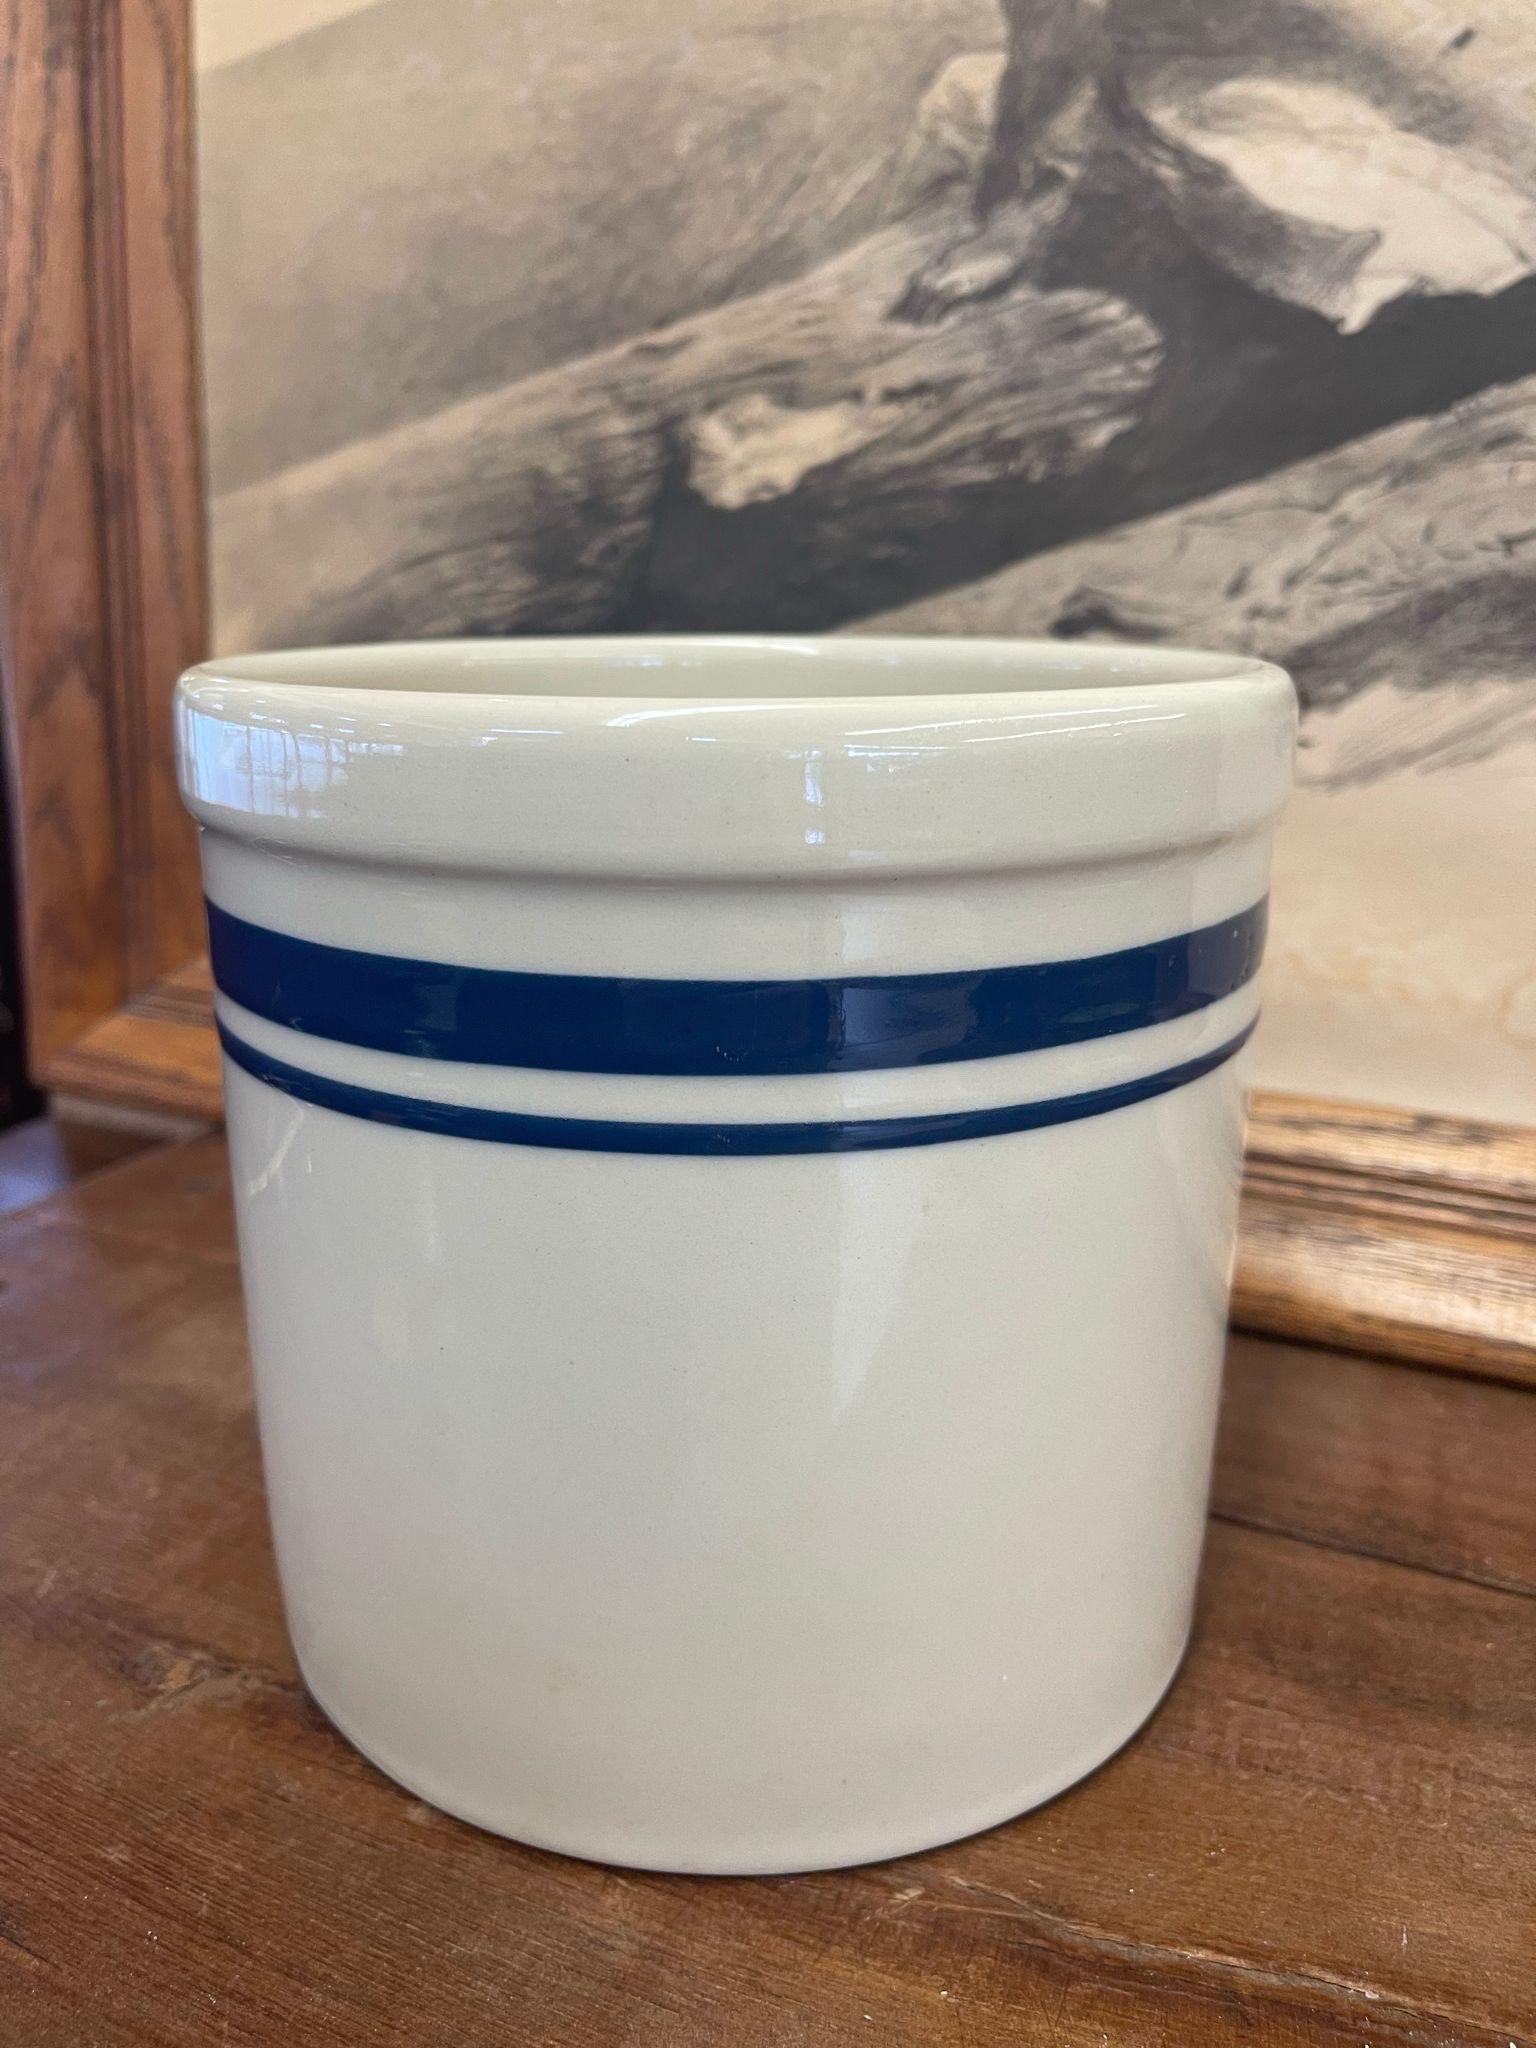 No Makers Mark. Ceramic Jar with Two Blue Stripes. Vintage Condition Consistent with Age as Pictured.

Dimensions. 7 Diameter; 6 H